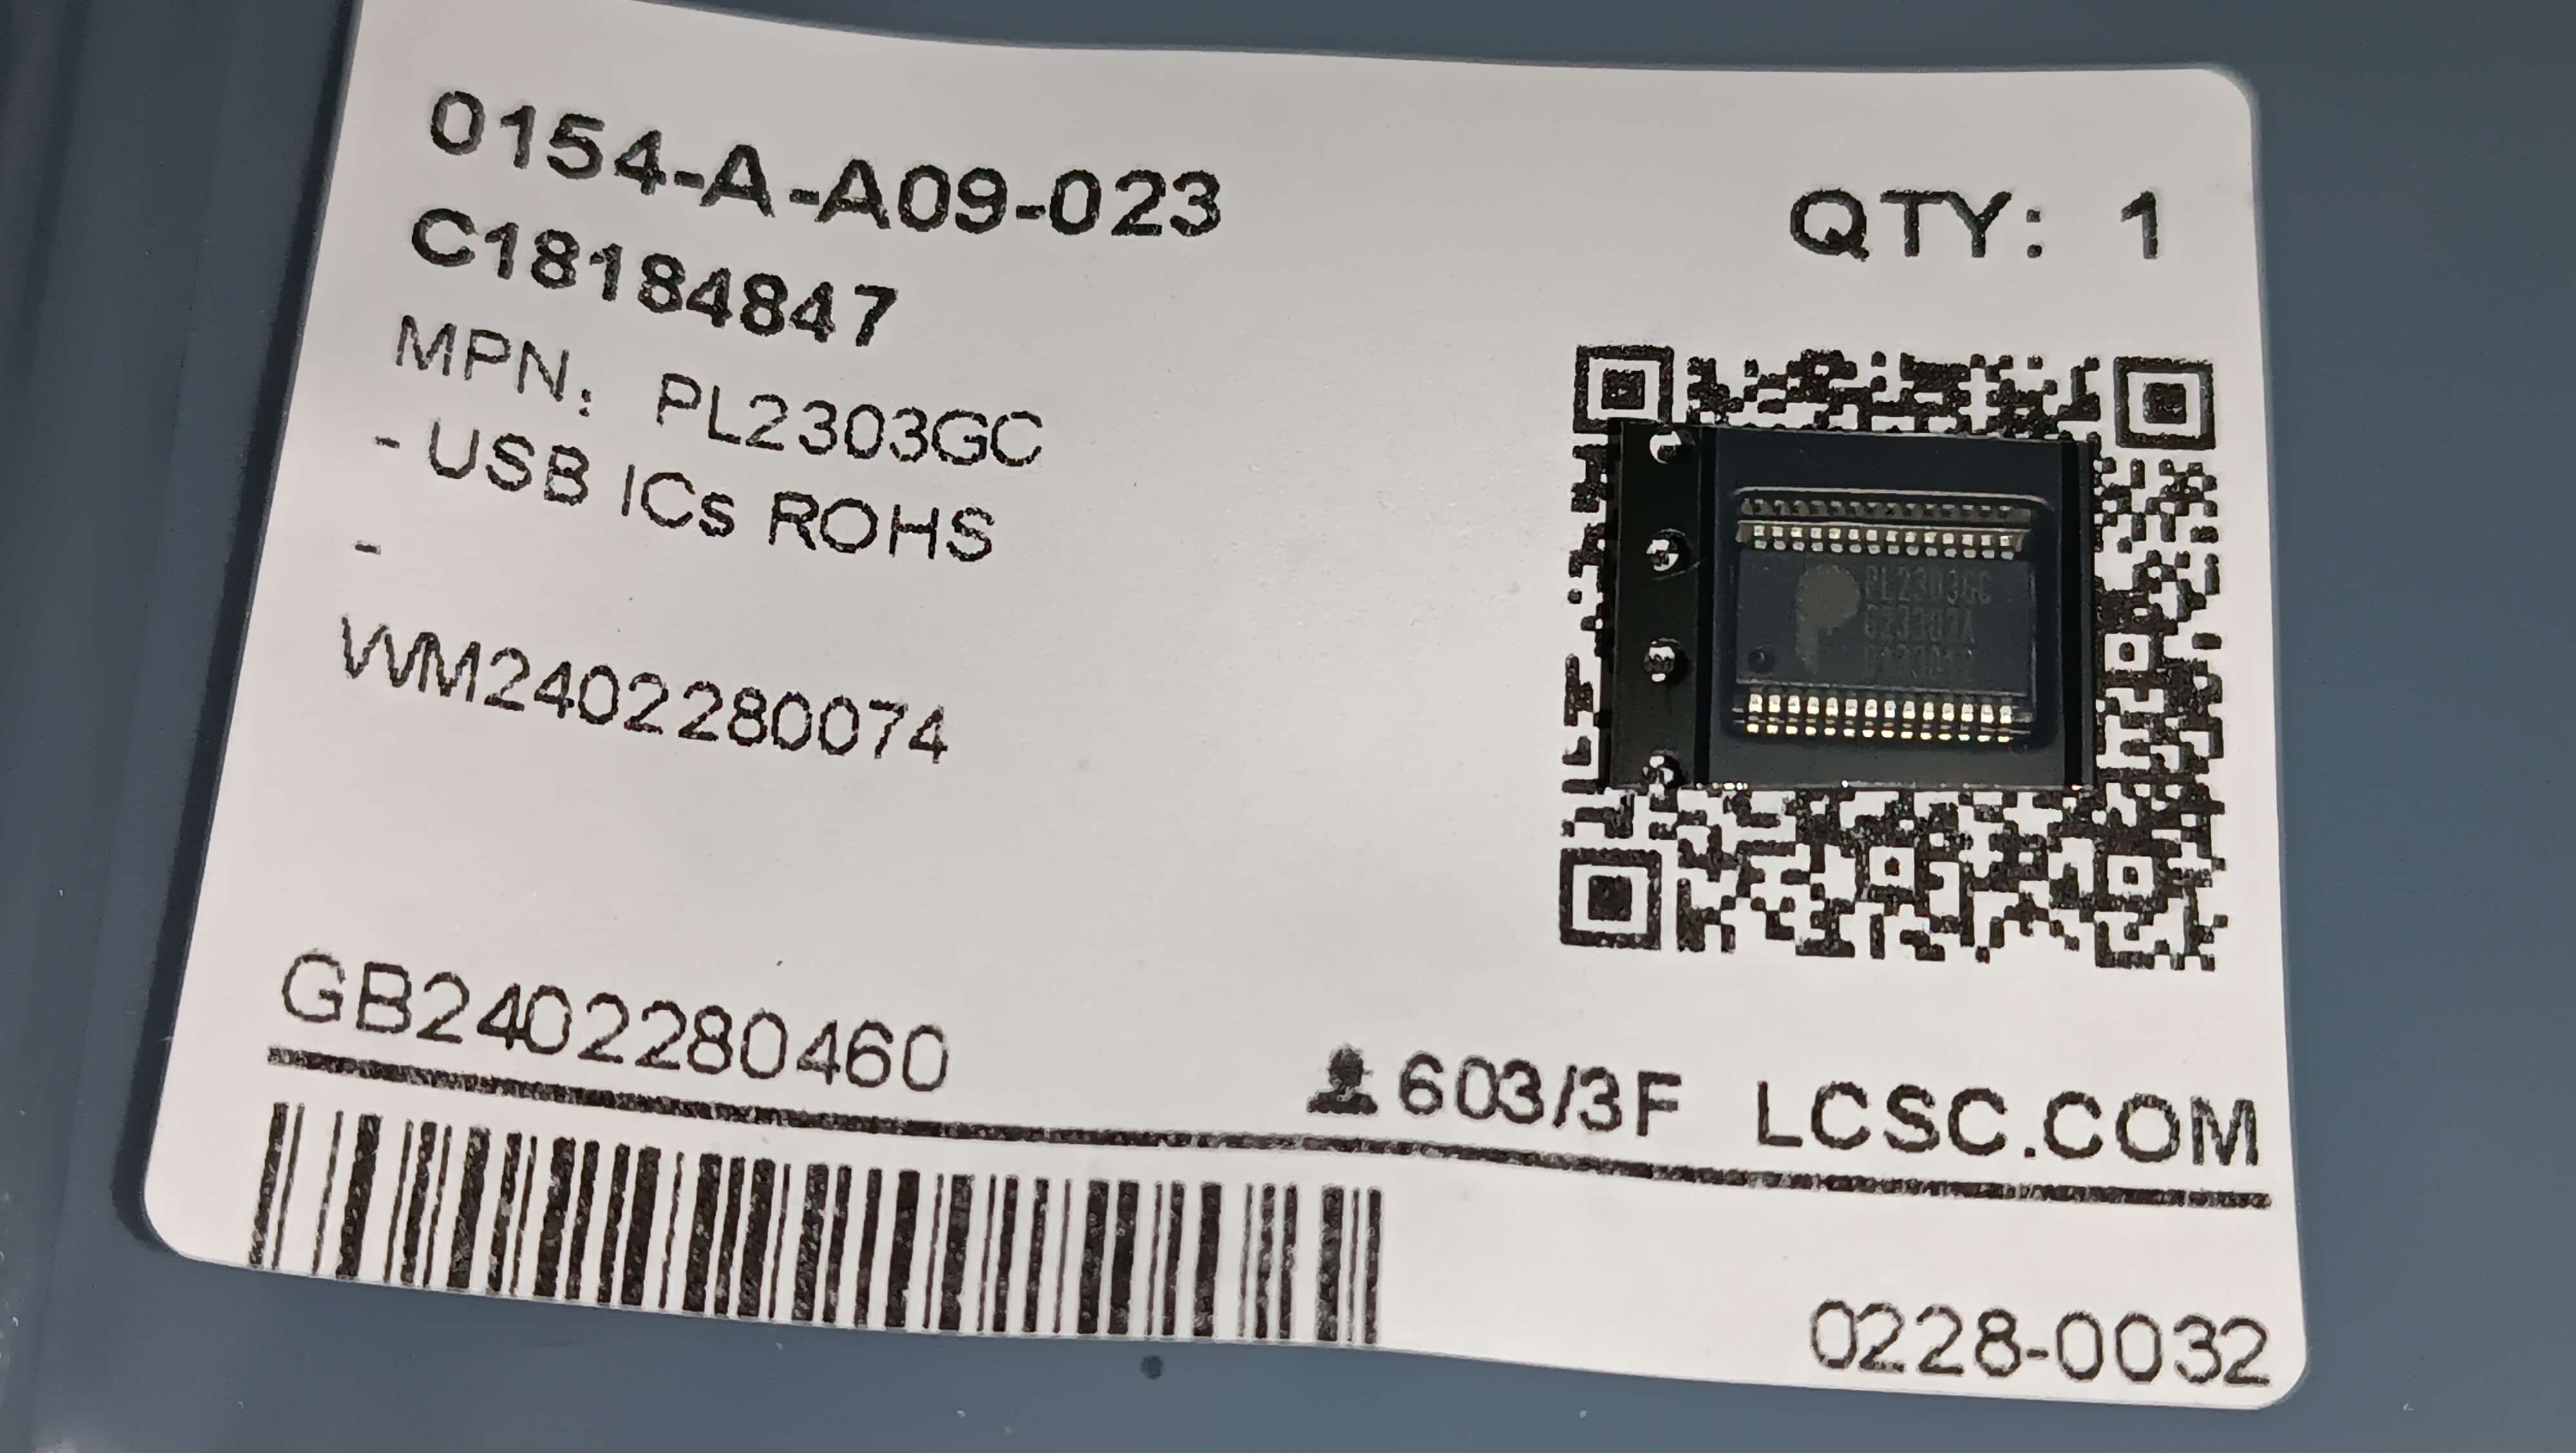 New PL2303GC chip from LCSC